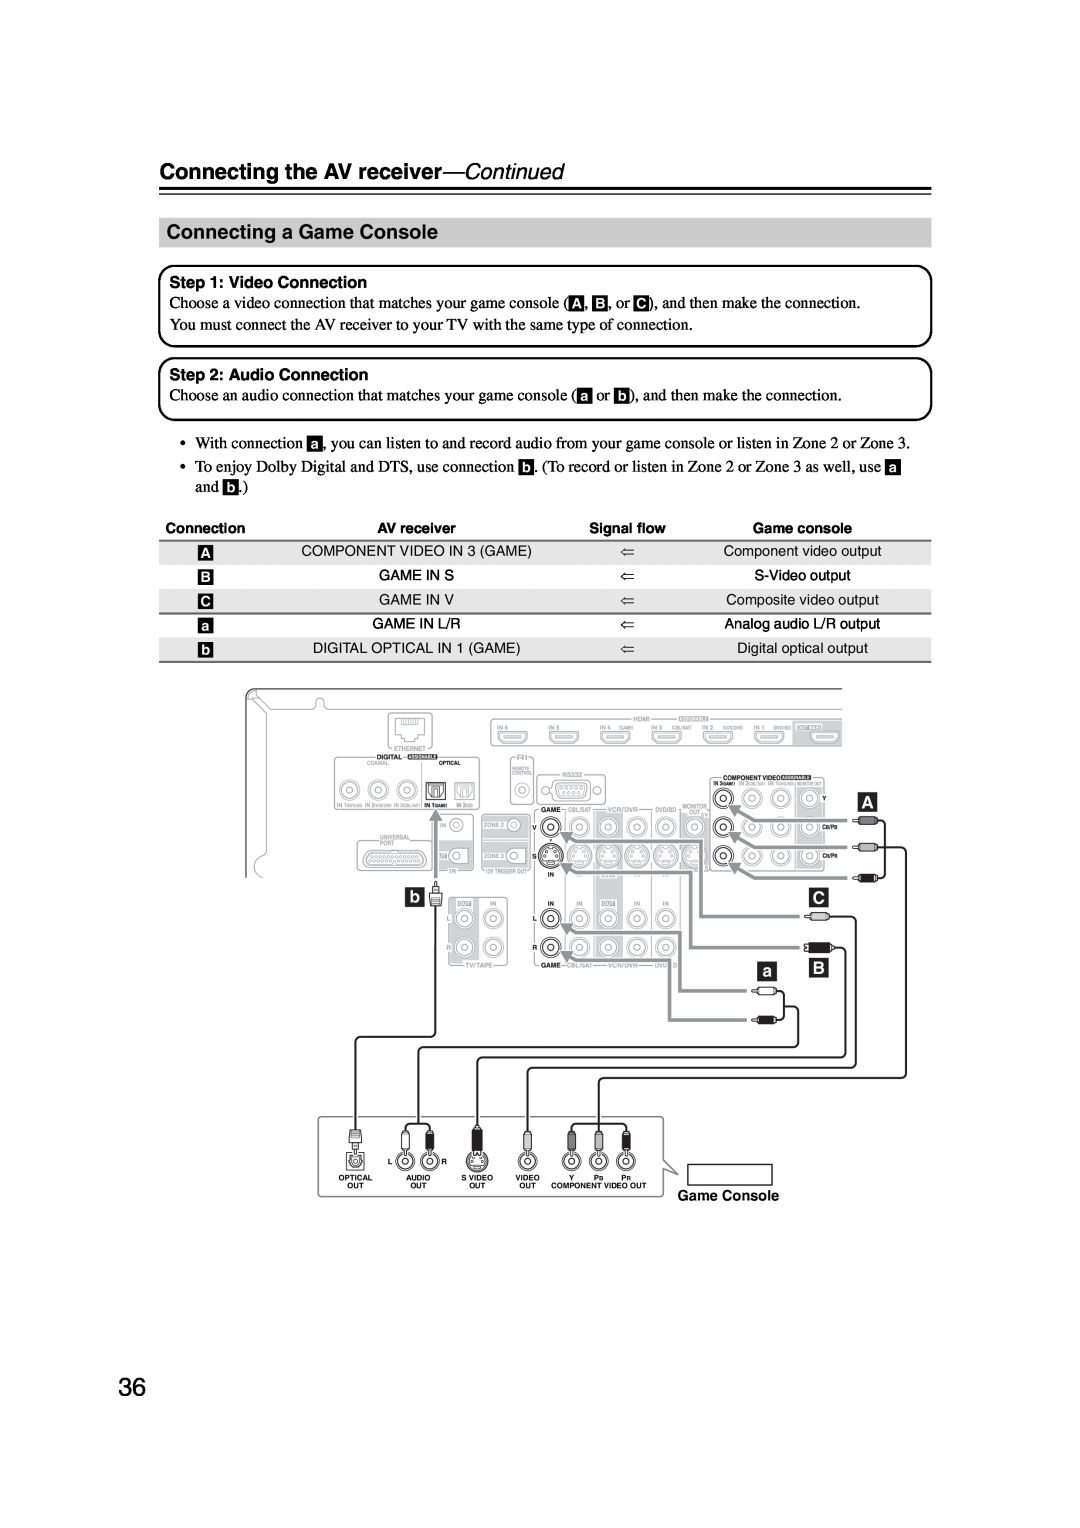 Onkyo TX-NR1007 instruction manual Connecting a Game Console, Connecting the AV receiver—Continued 